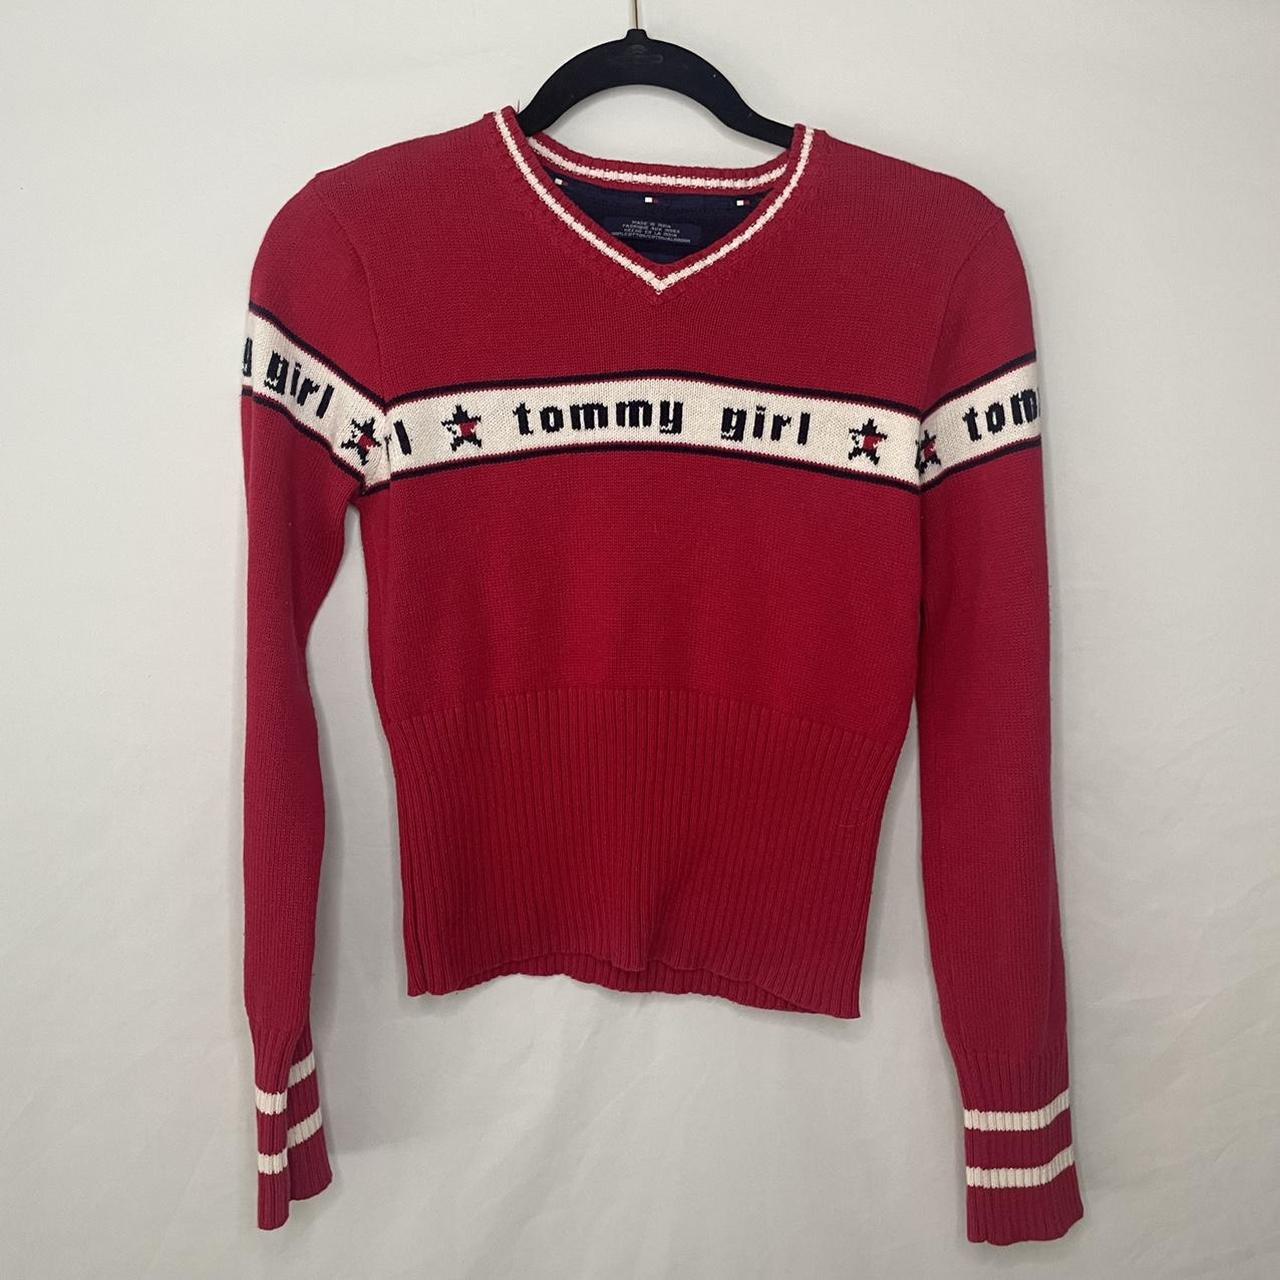 Product Image 2 - Tommy girl sweater, vintage 90s,